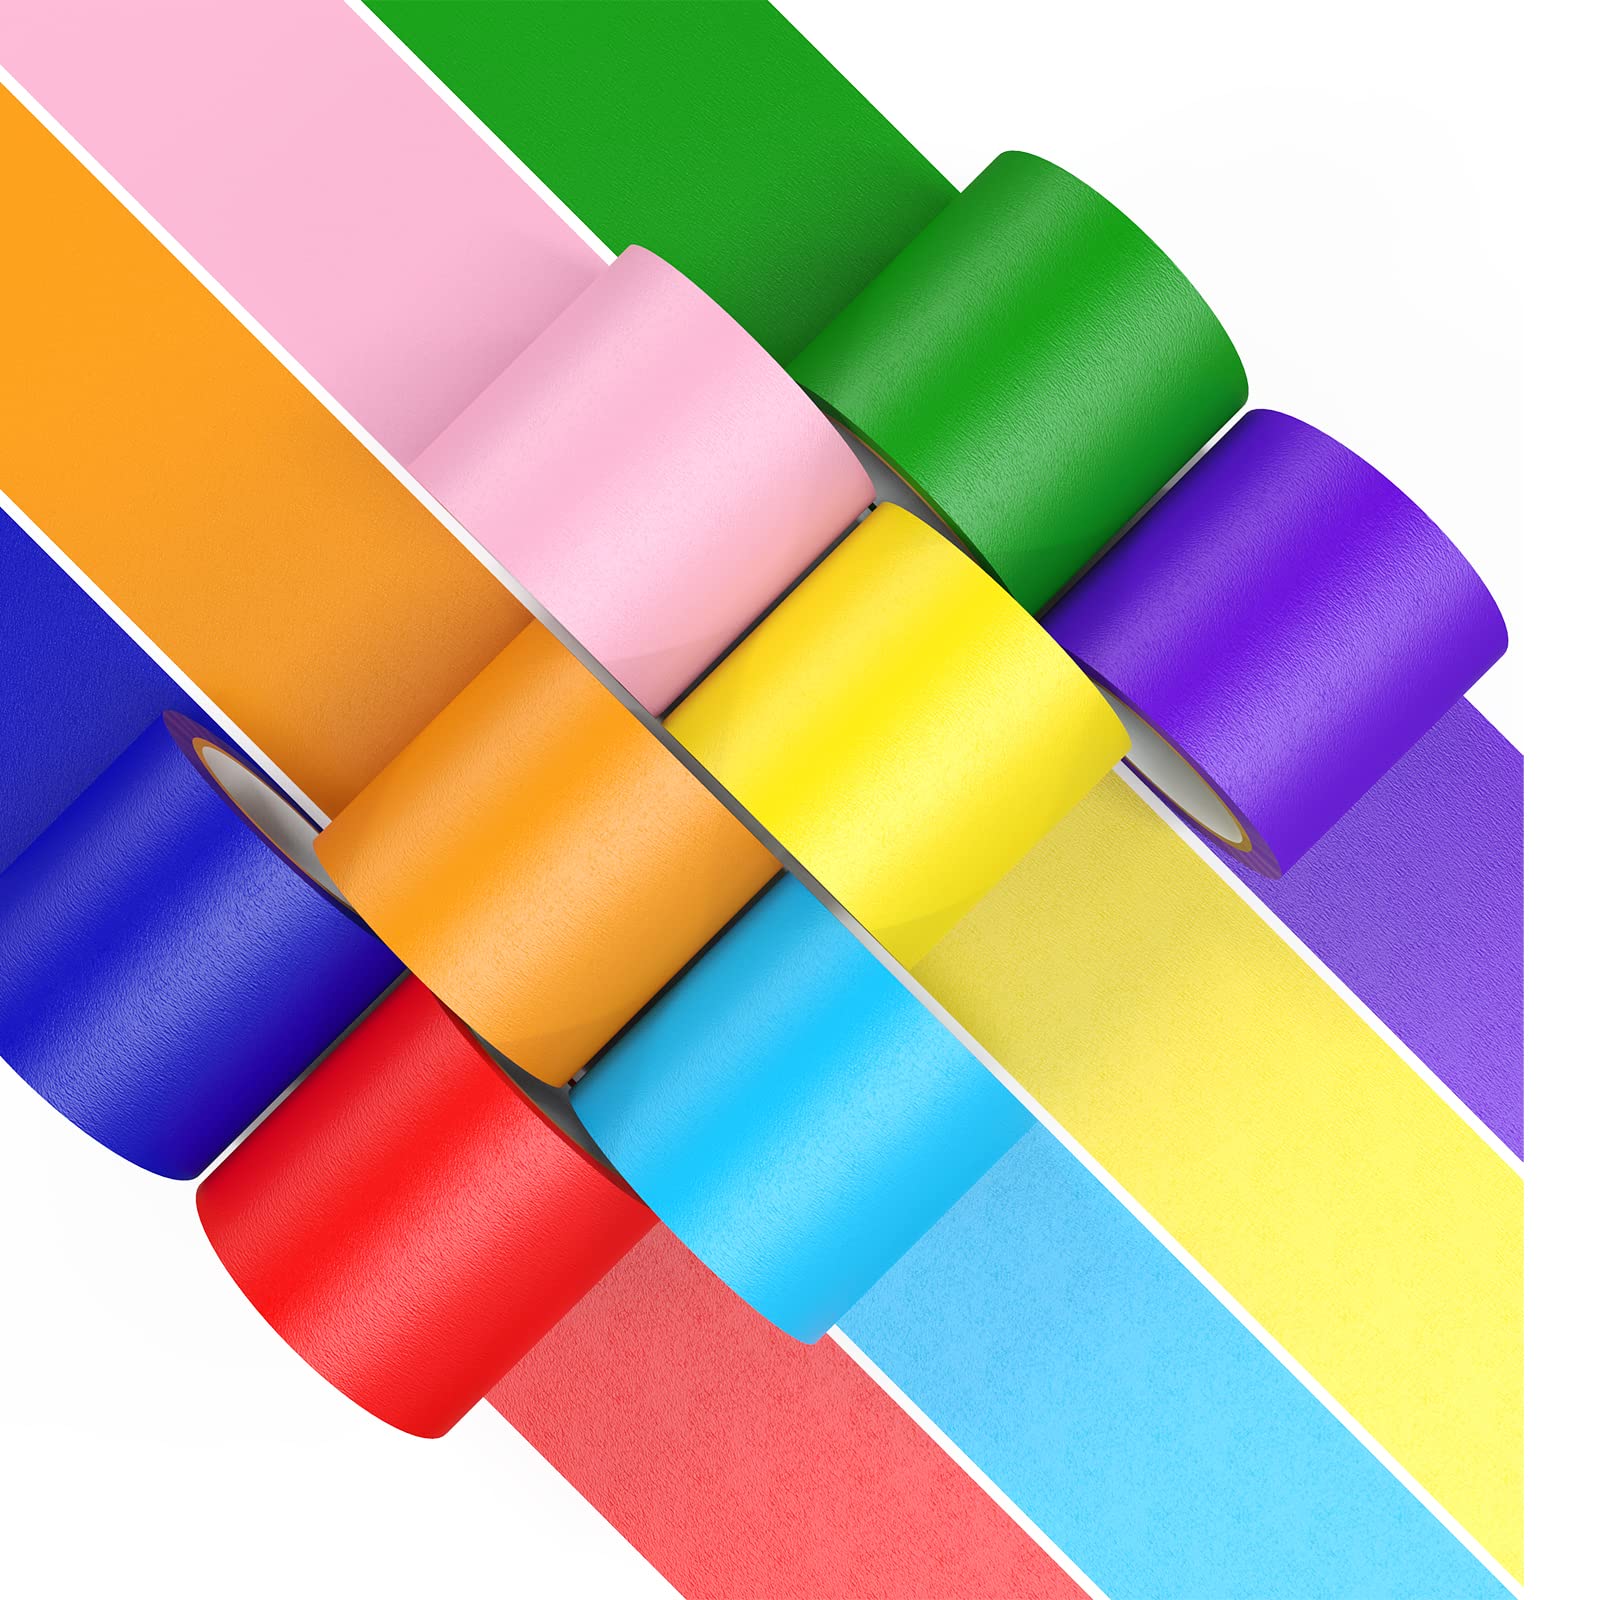 8 Rolls Colored Masking Tape Rainbow Colors Painters Tape Colorful Craft  Art Paper Tape For Arts Crafts Diy Decorative 8 Colors